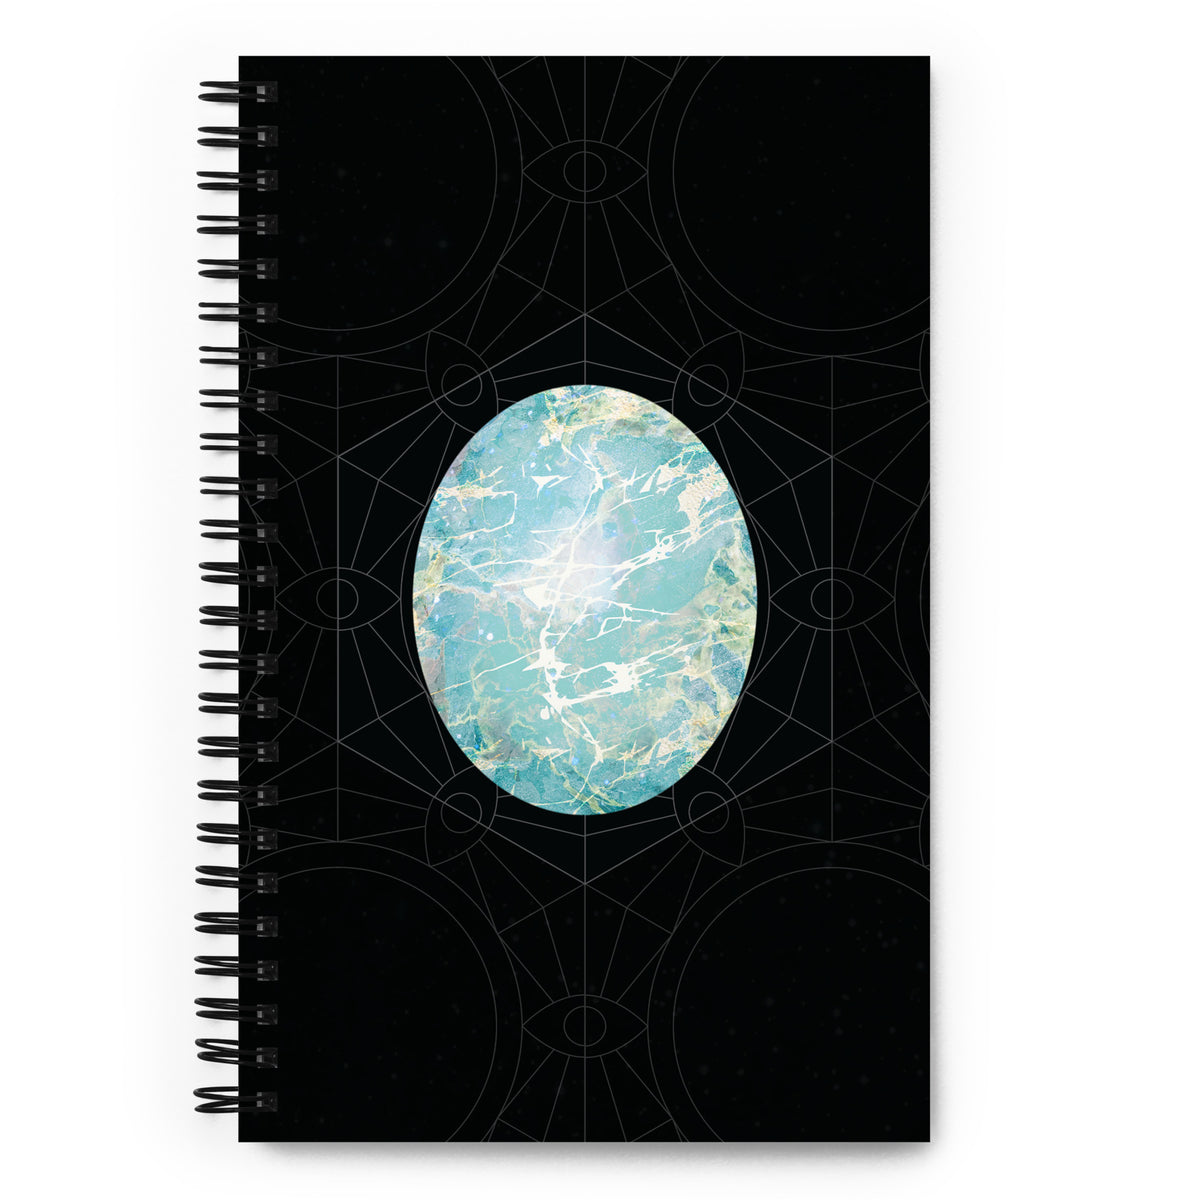 Turquoise Journal